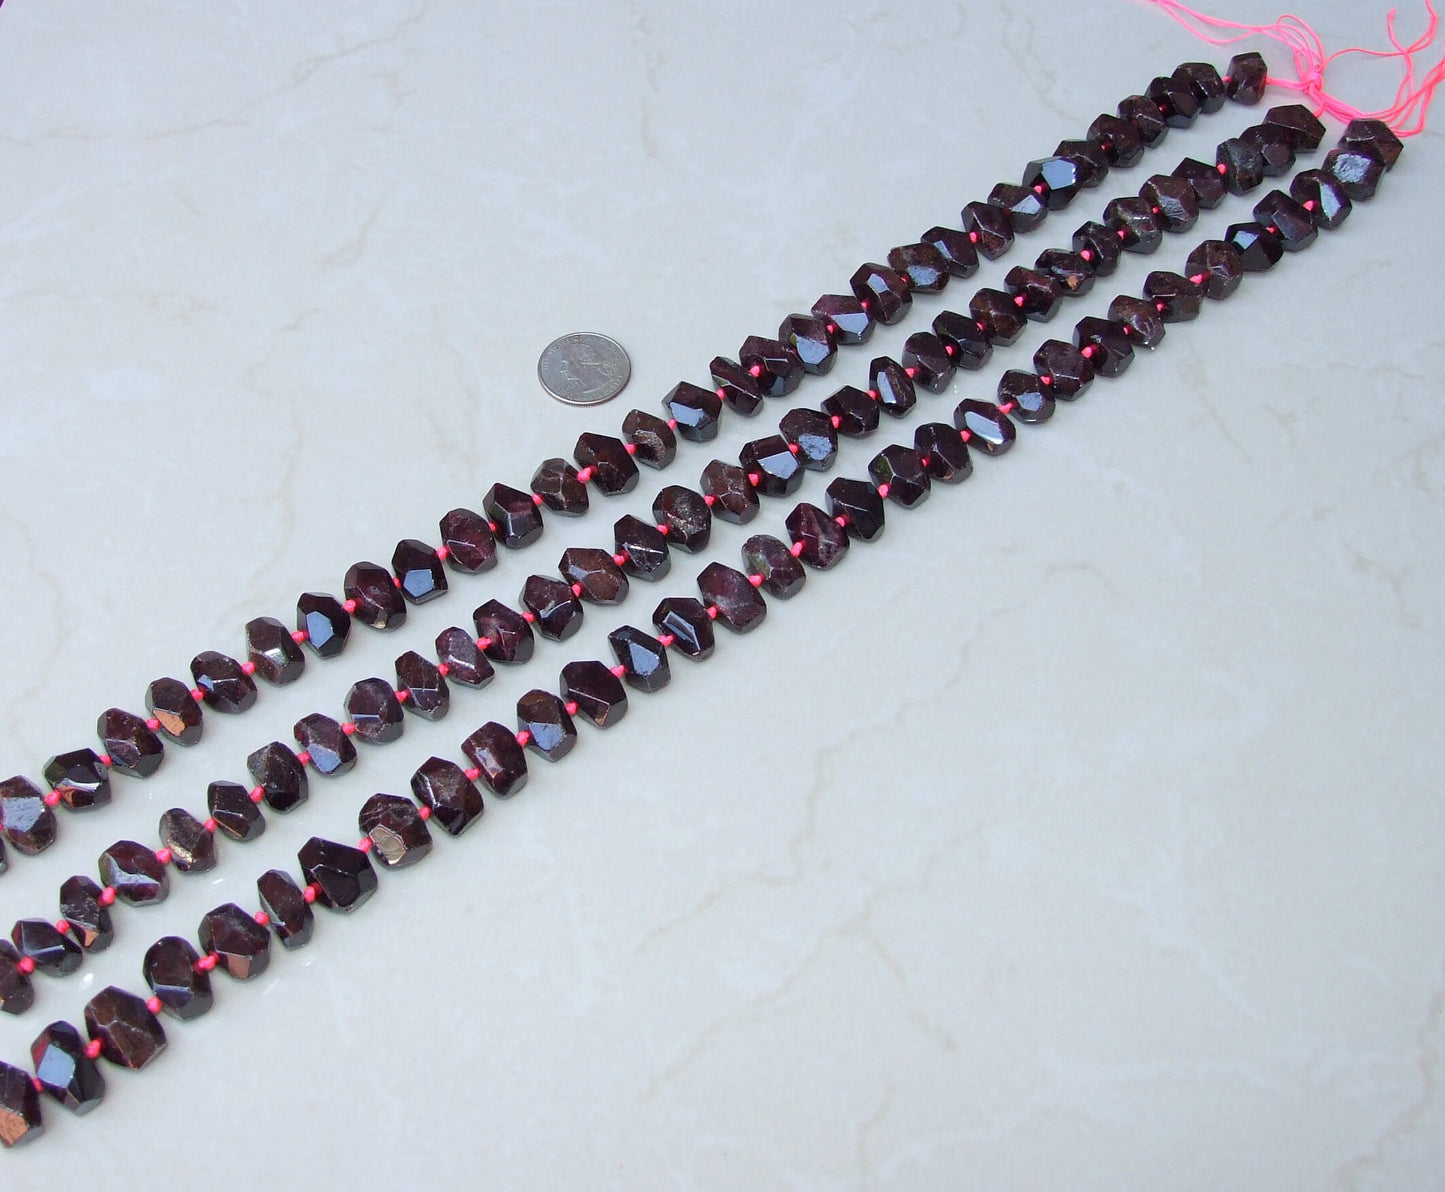 Red Garnet Faceted Nugget, Gemstone Beads, Polished Garnet Pendant, Garnet Bead, Half Strand, Cross Drilled - Small 18mm and Large 25mm